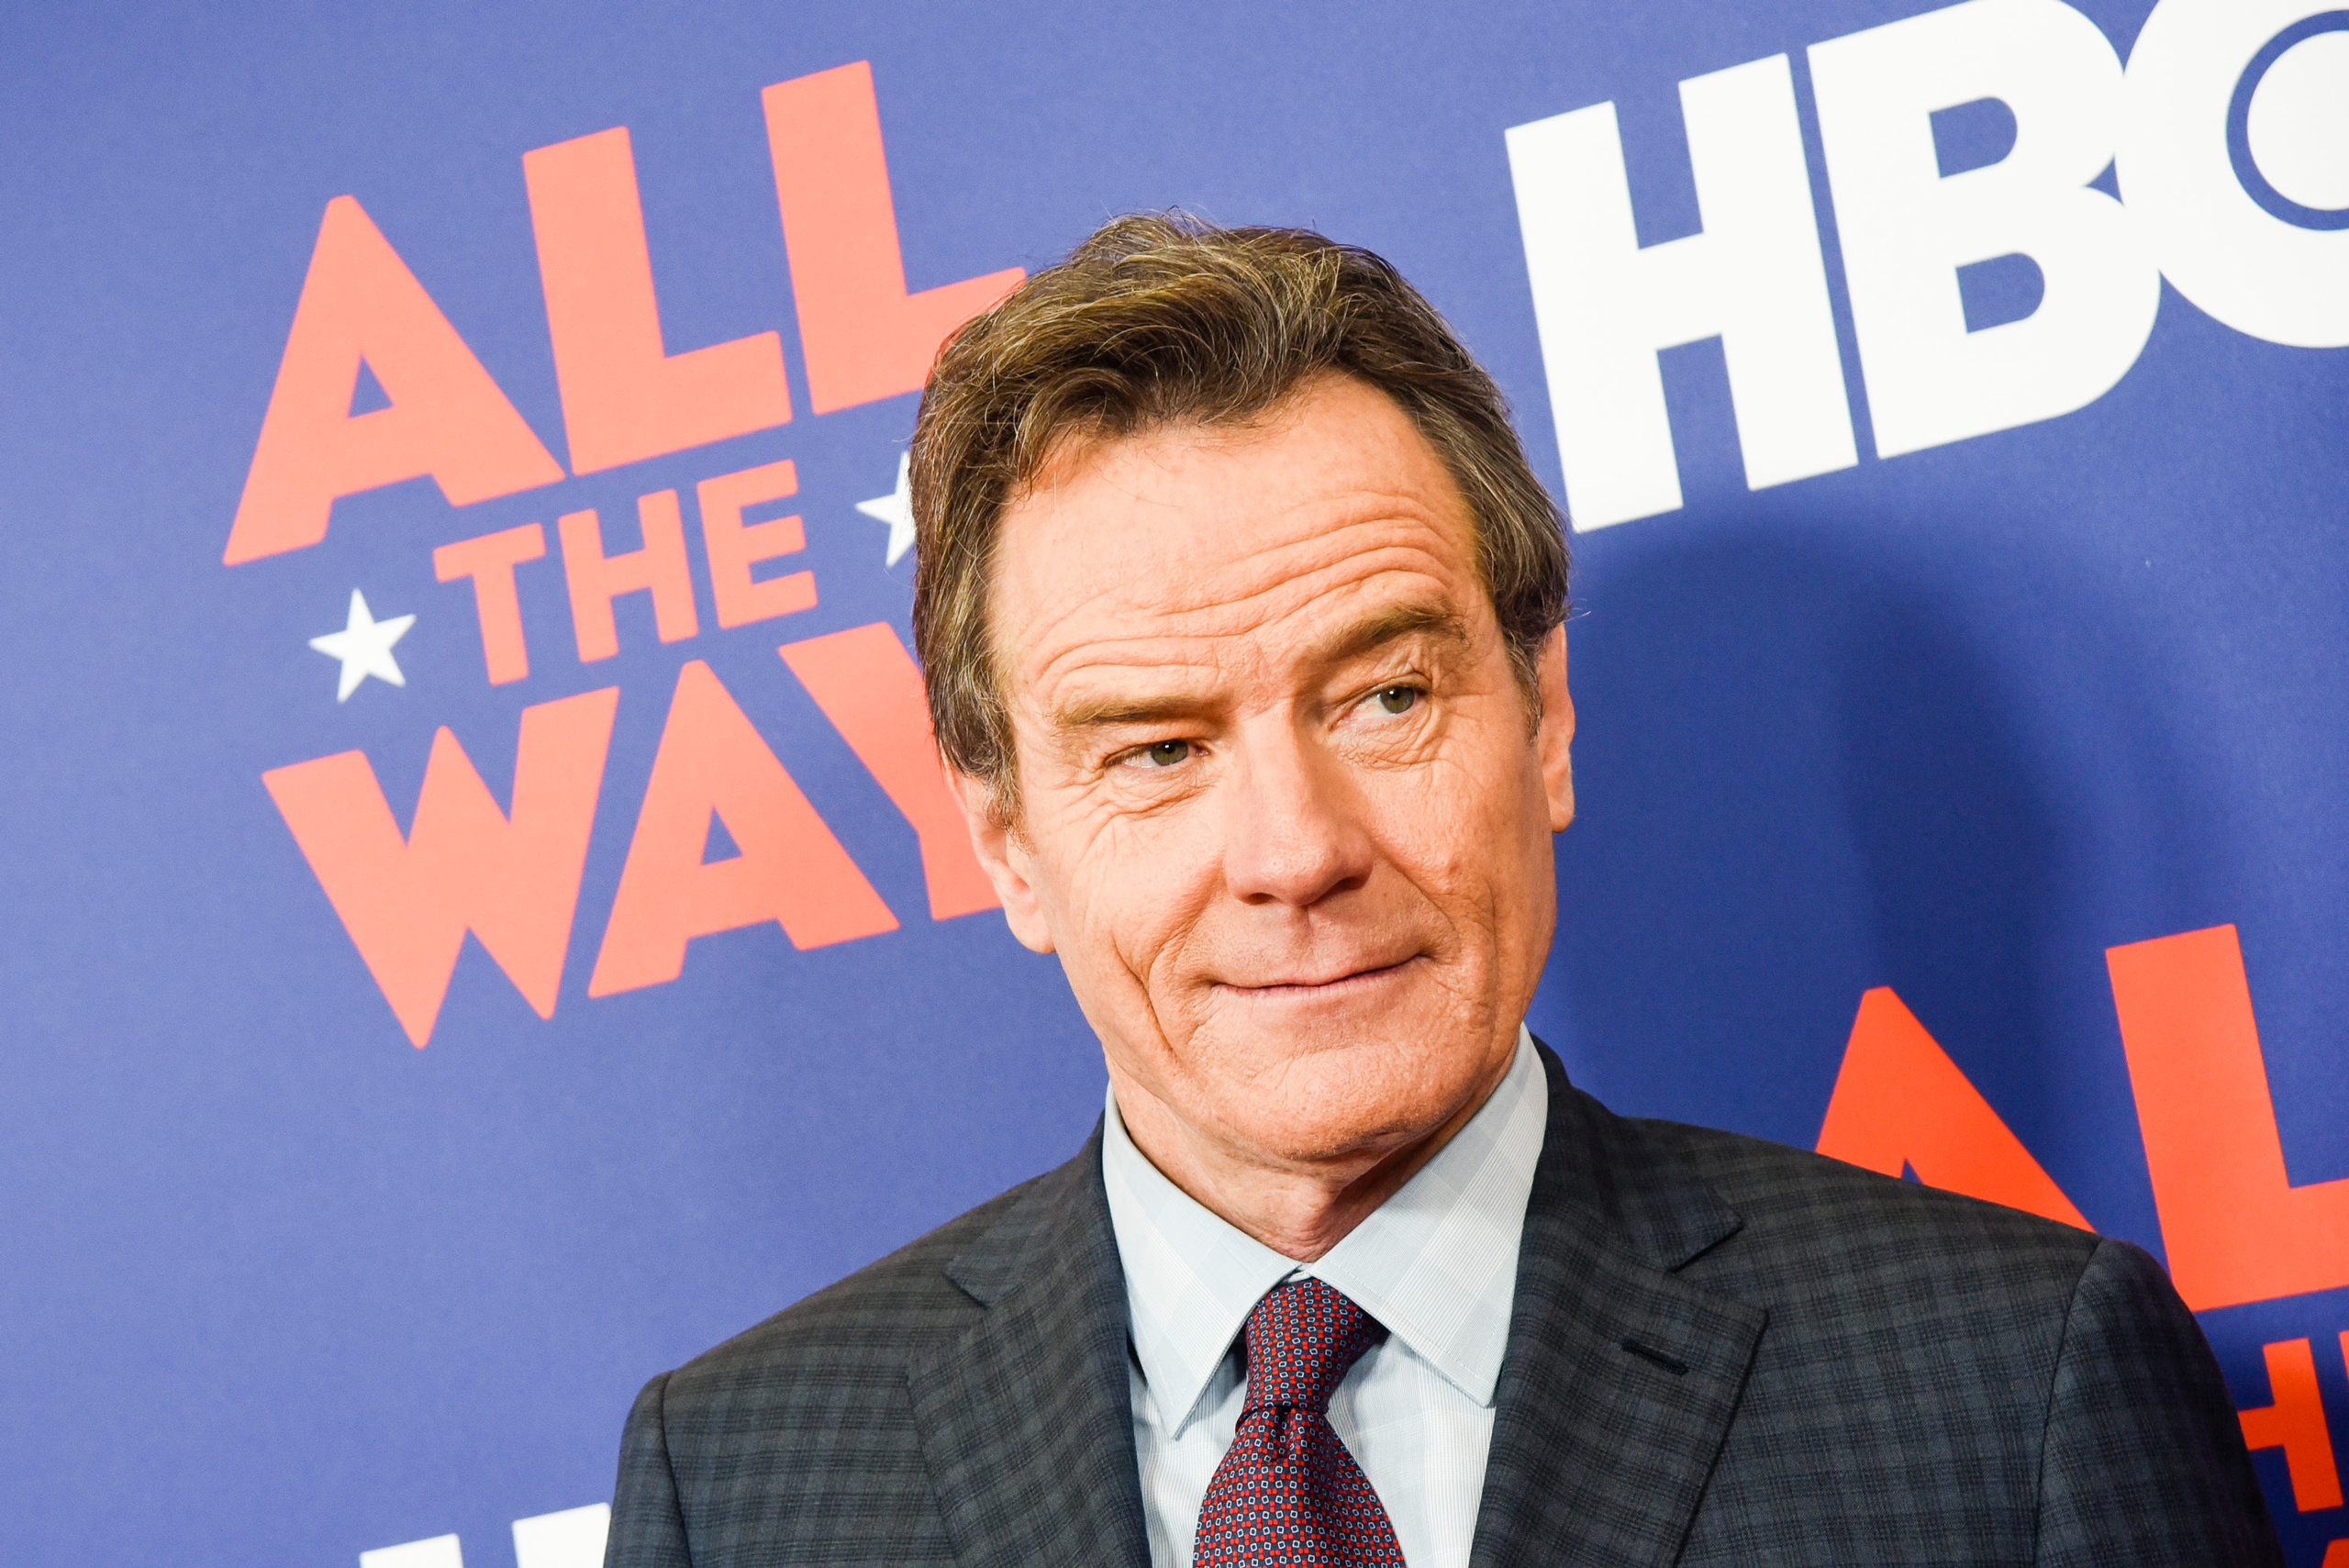 Bryan Cranston poses for photographers during HBO's "All The Way" (Kris Connor—Getty Images)